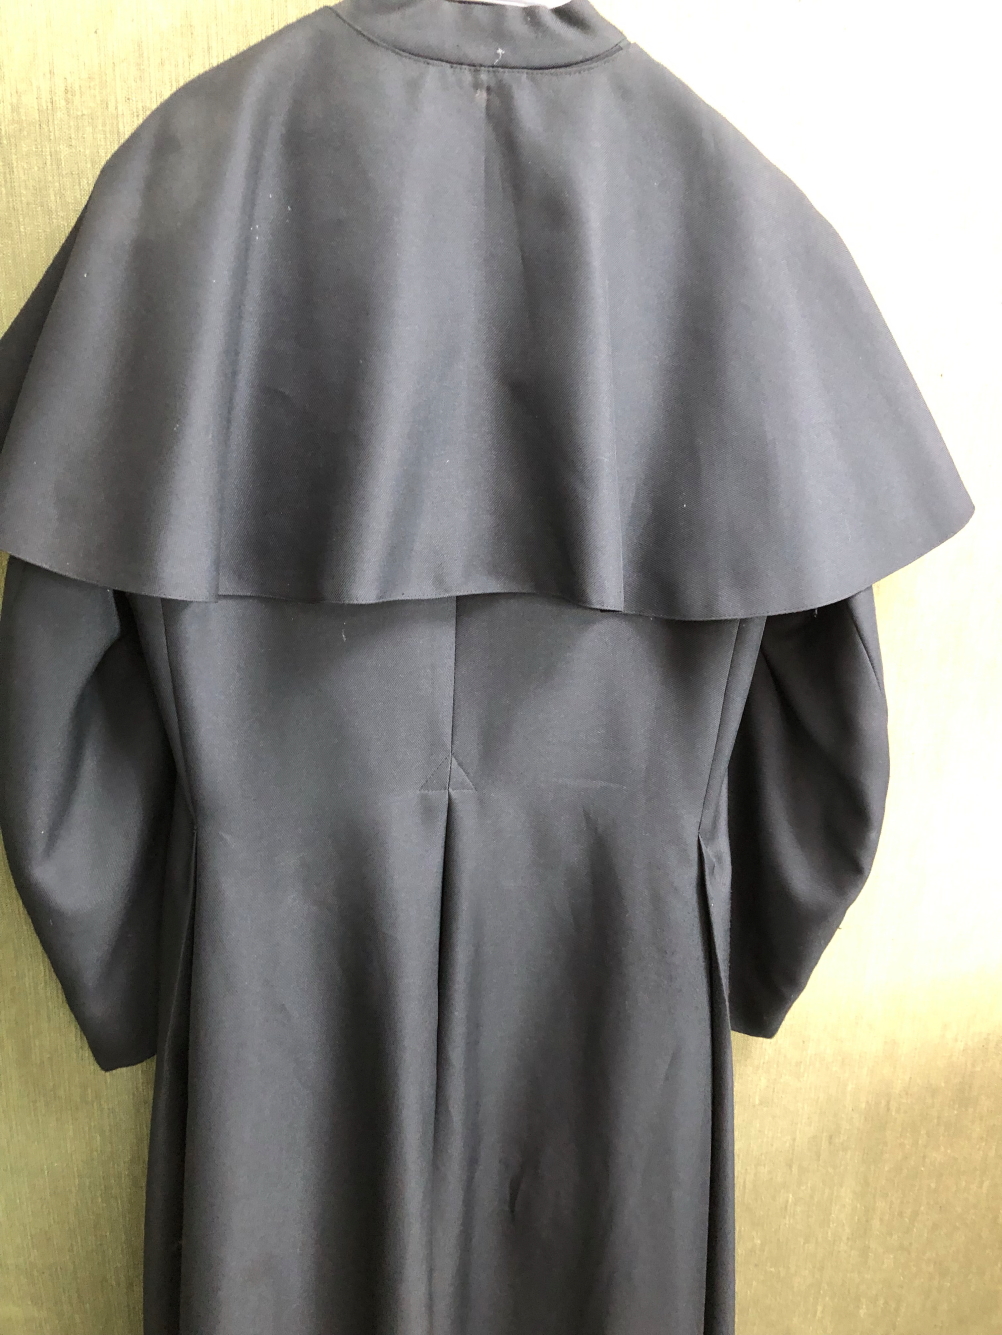 CASSOCK. A WIPPELL & CO ROMAN CATHOLIC BLACK CAPED CASSOCK. SHOULDER TO HEM 154cms. - Image 4 of 4